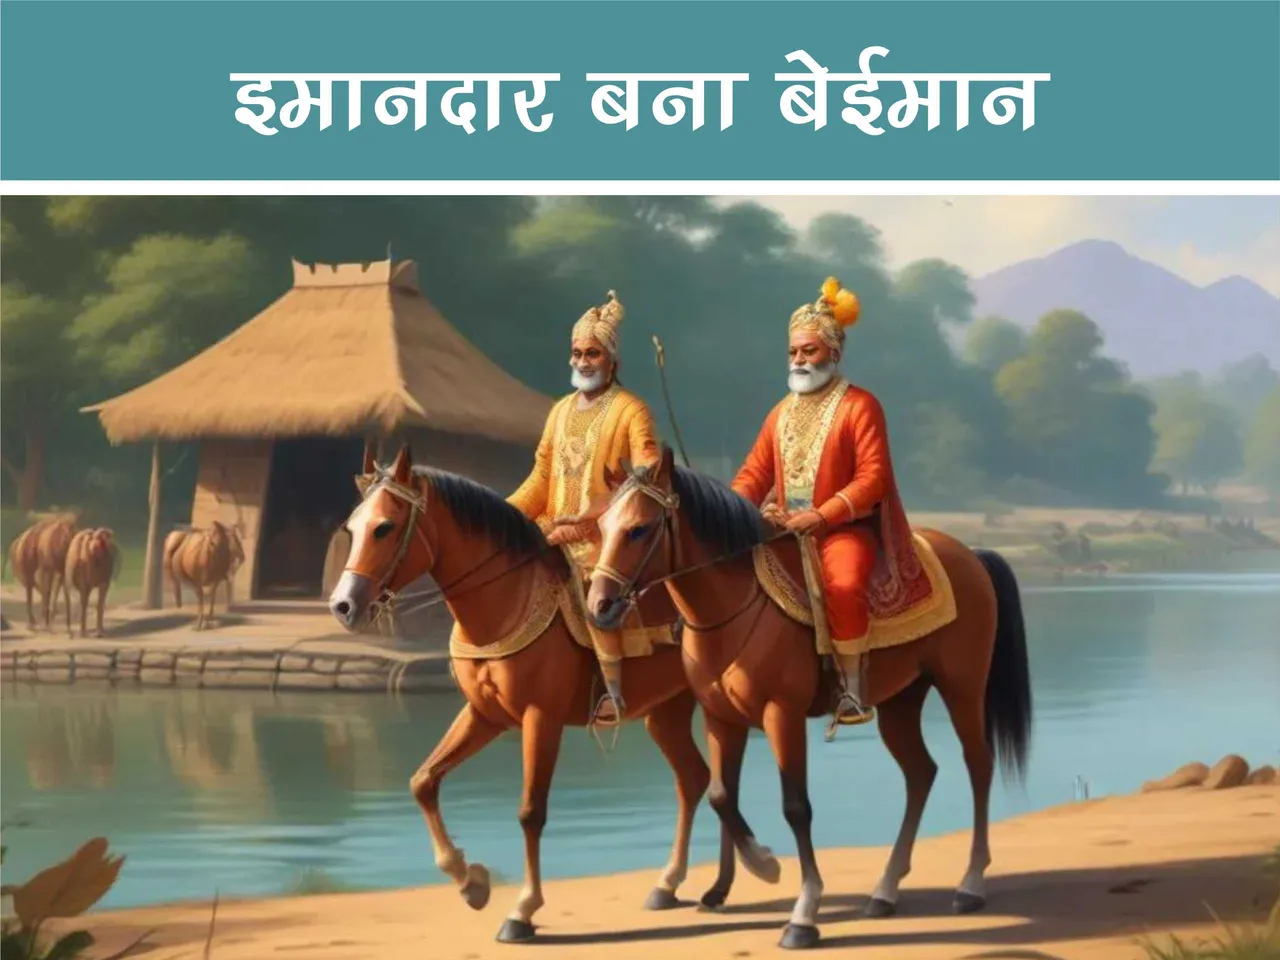 King on his horse along side a river cartoon image